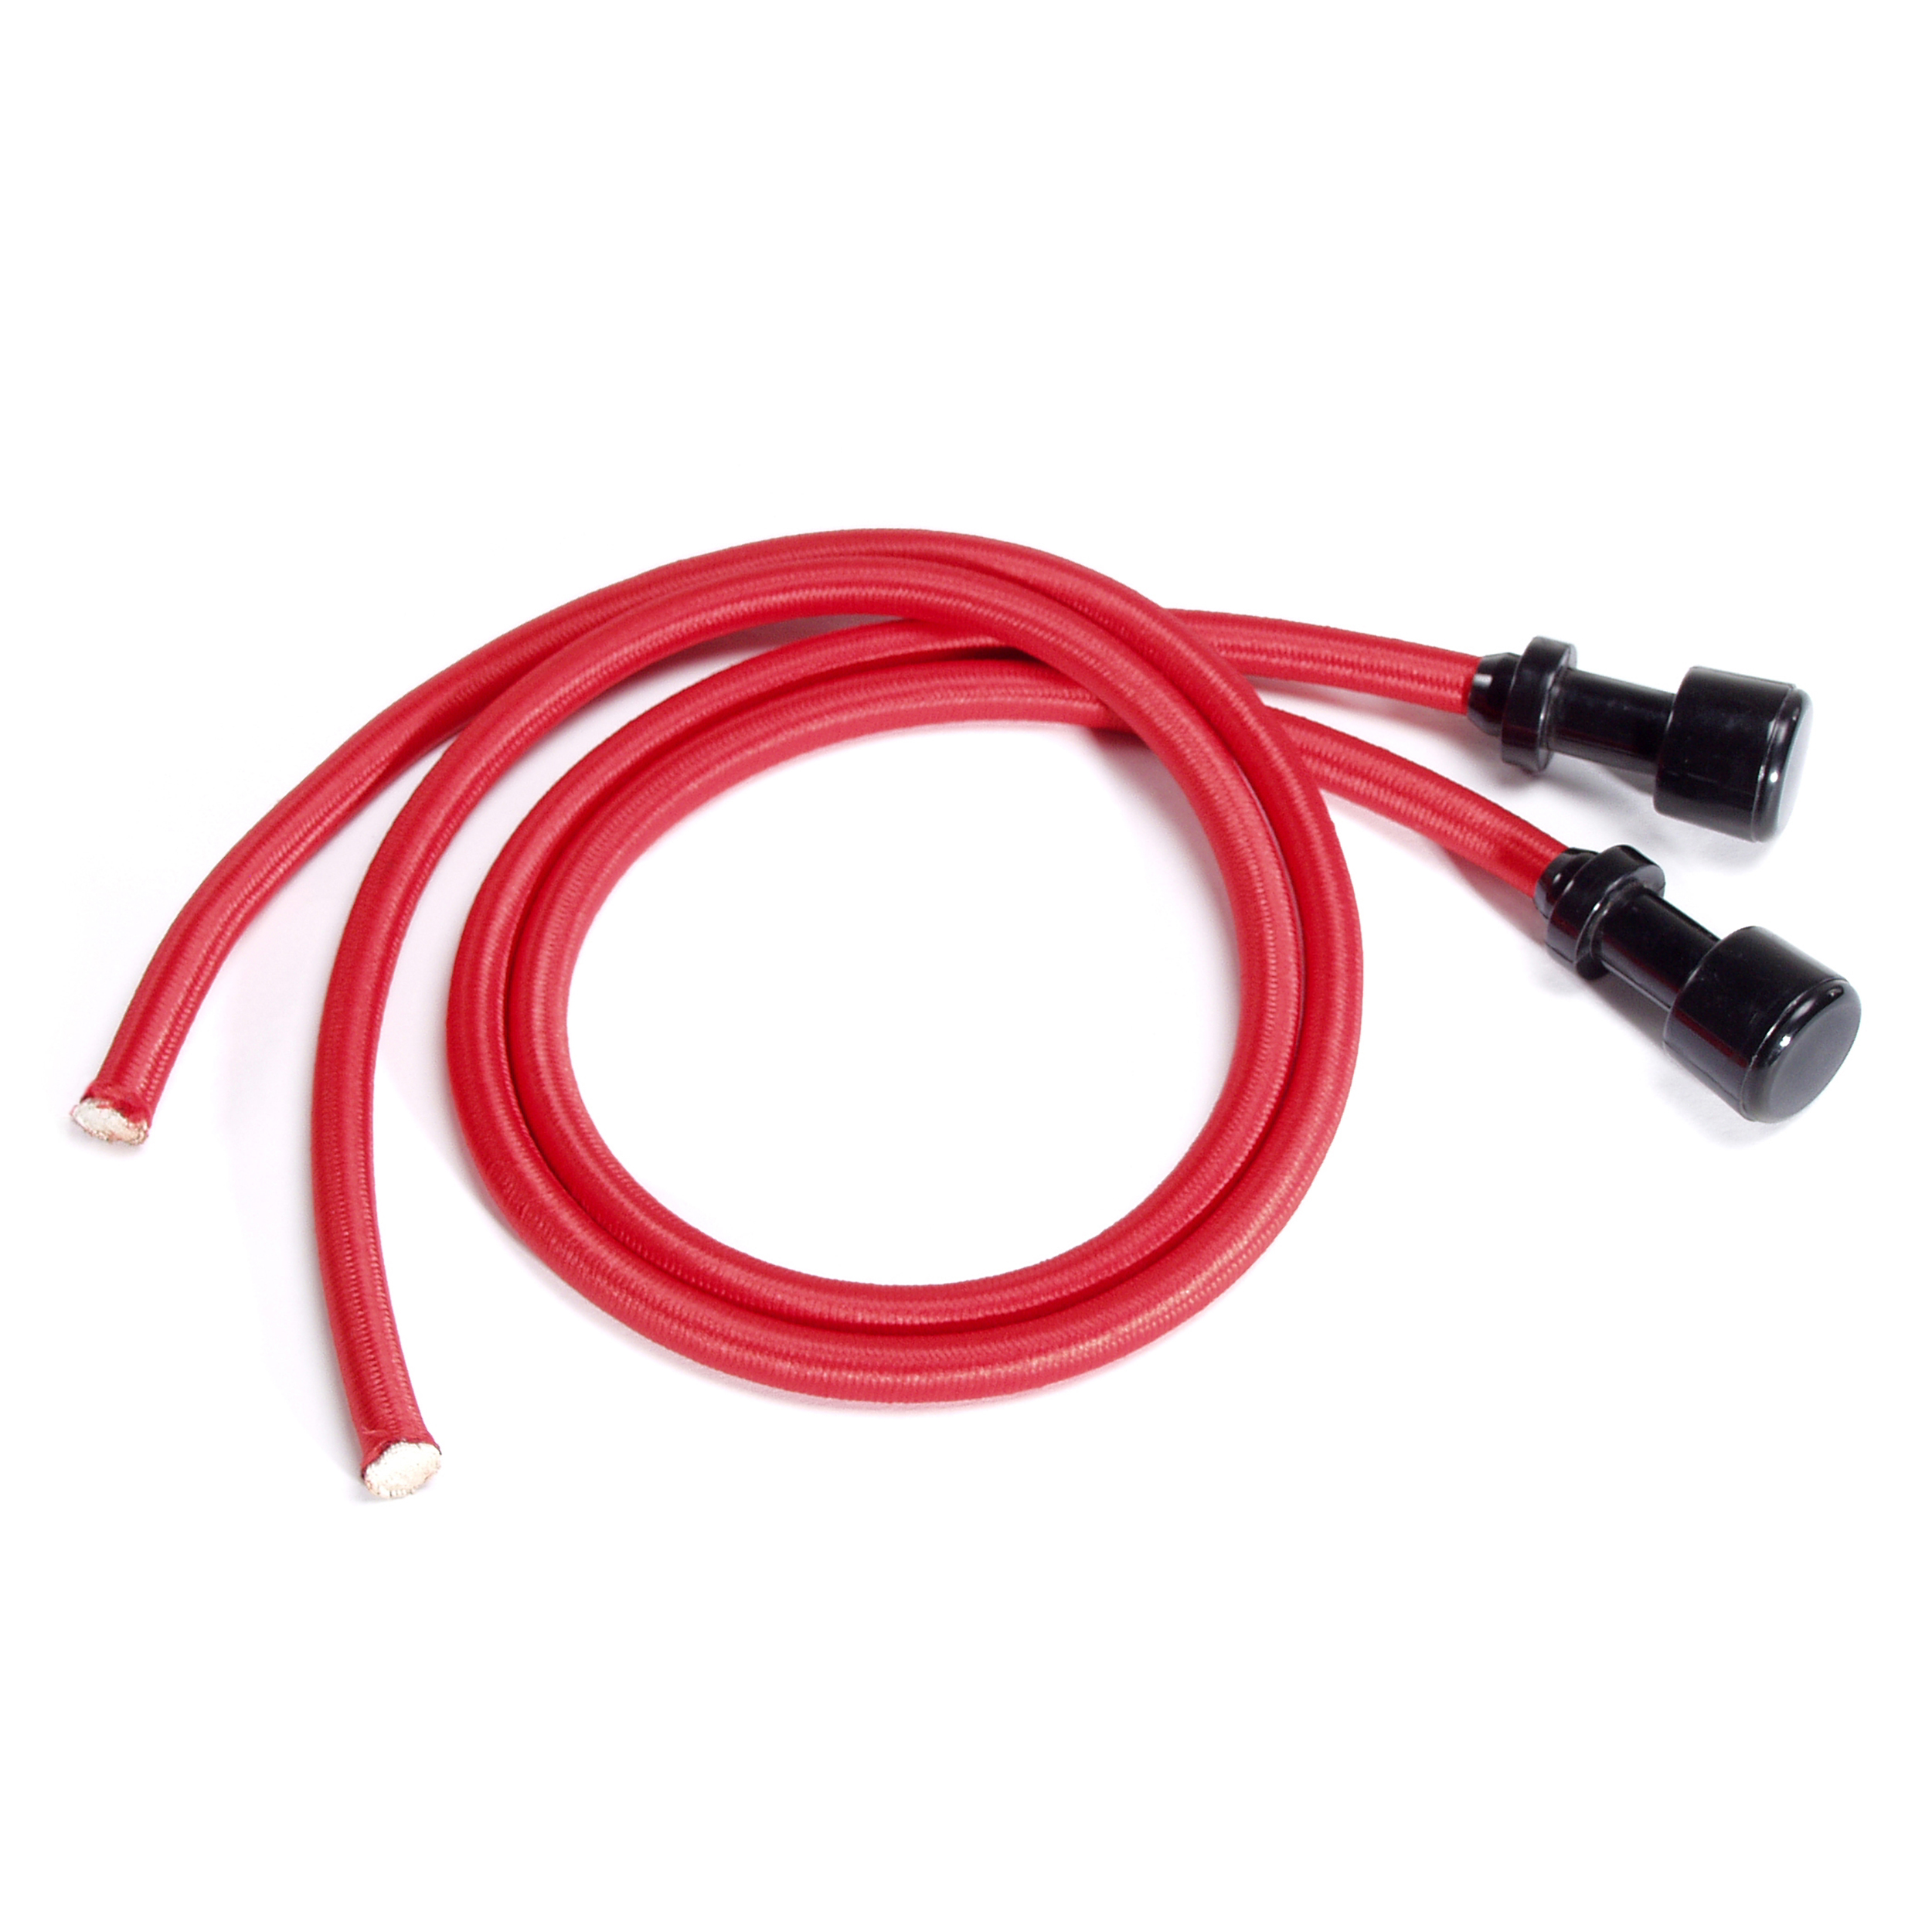 Red elastic bungee cords.